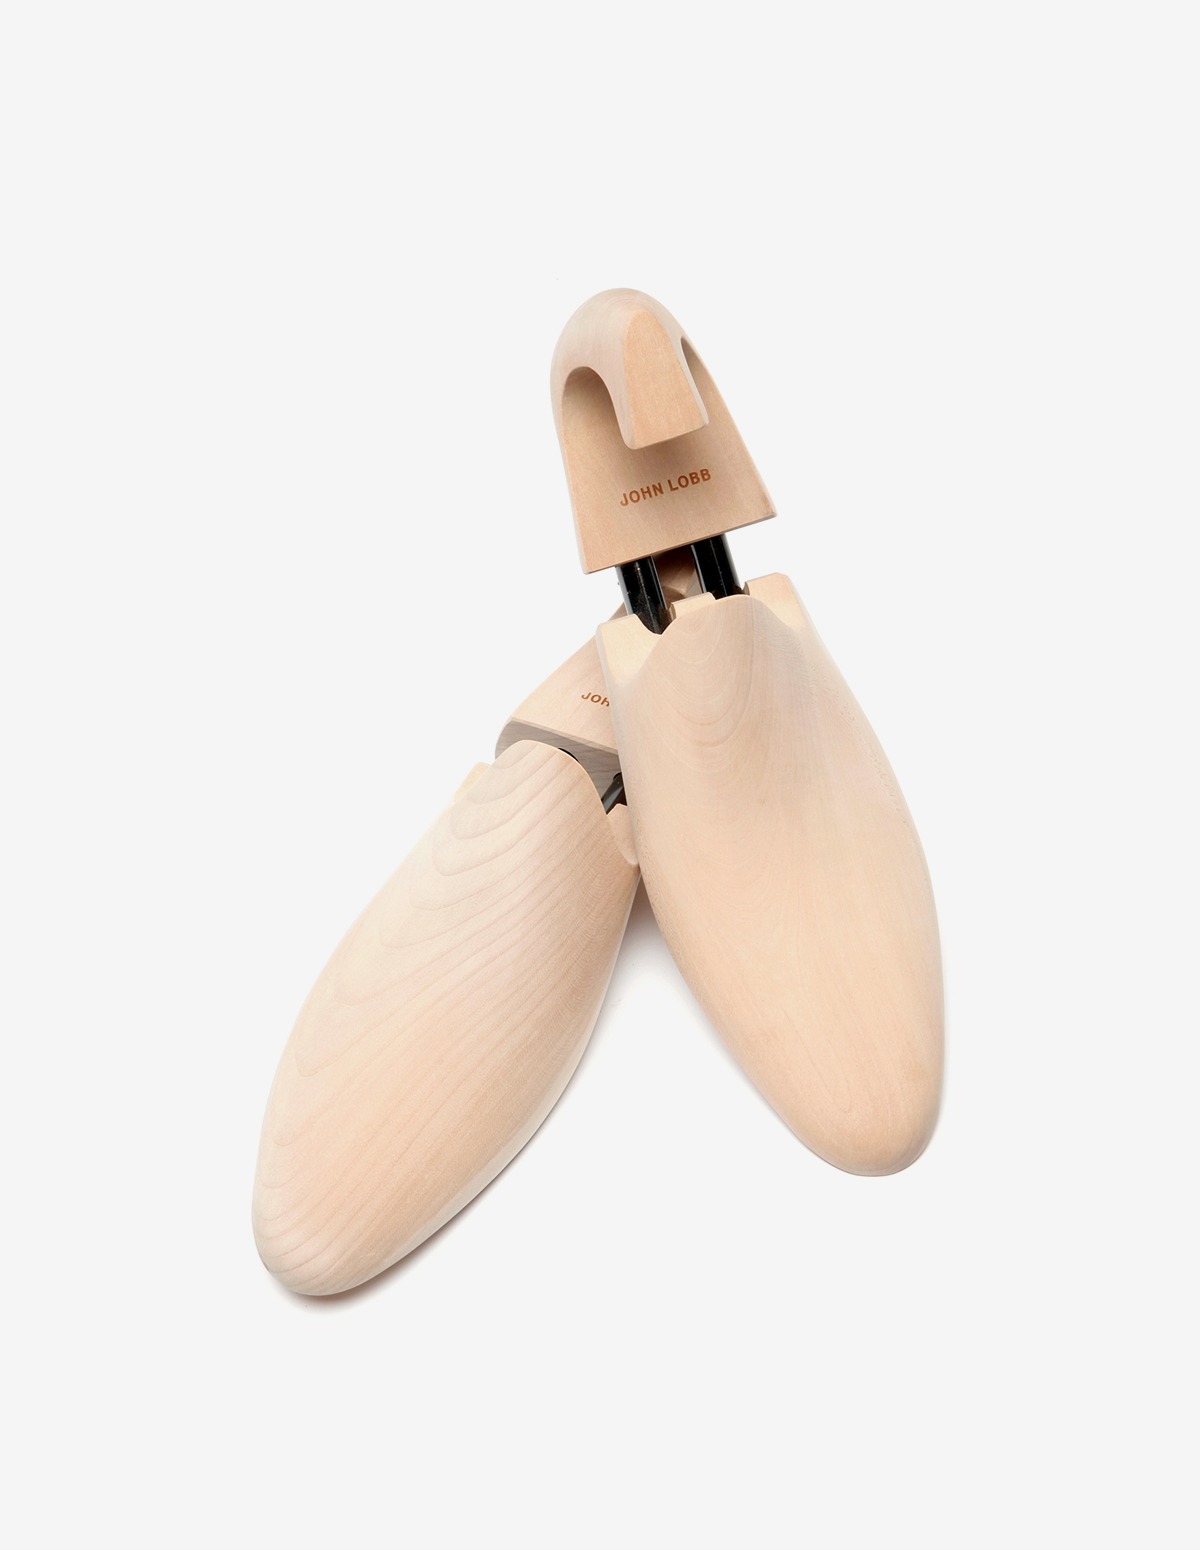 Loafer Shoe Trees